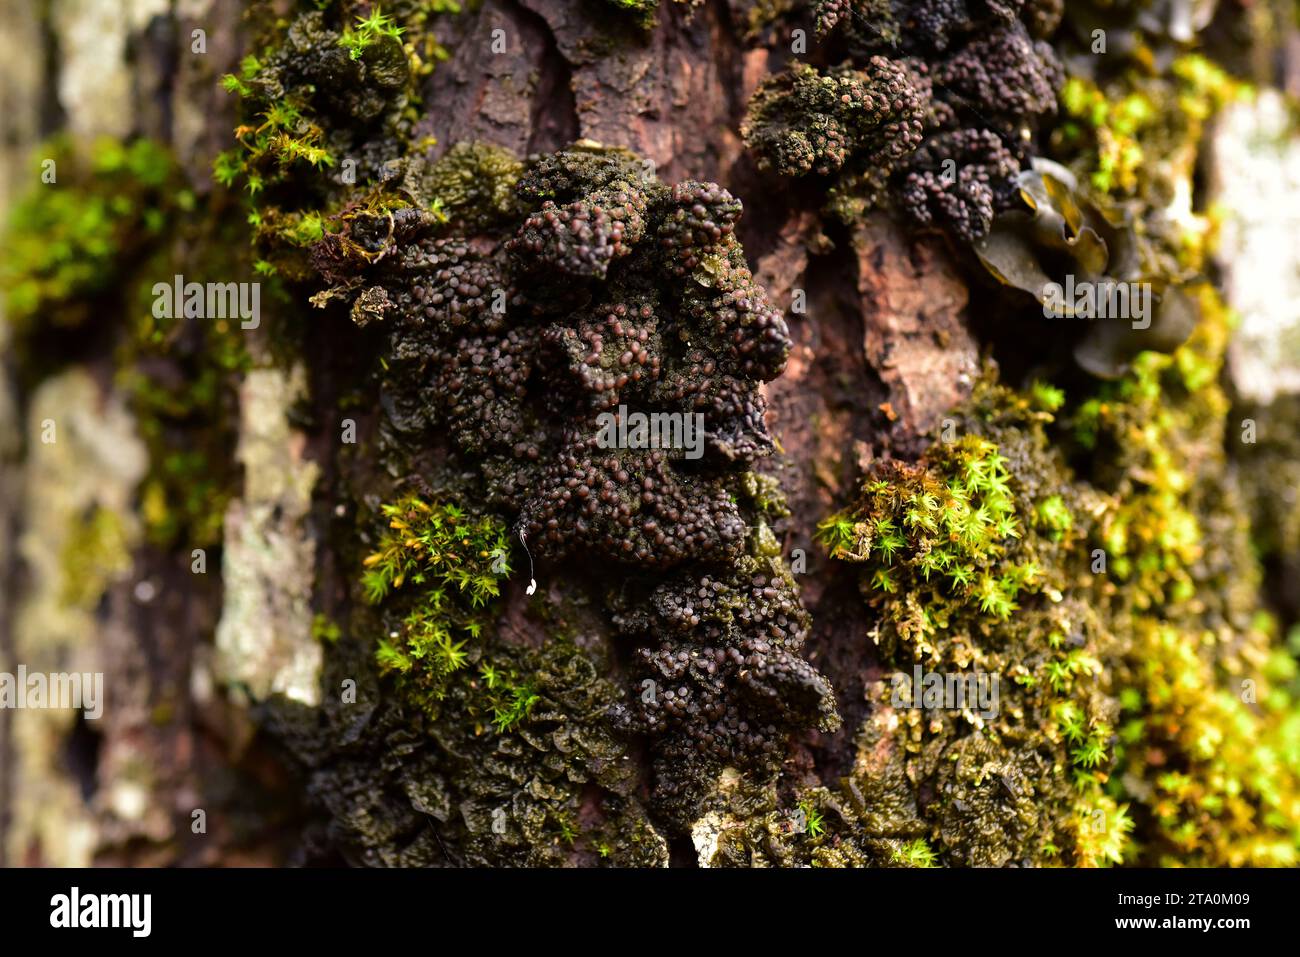 Collema nigrescens is a foliose jelly lichen found growing on the bark of trees. This photo was taken in Val d'Aran (Valle de Aran) , Lleida province, Stock Photo